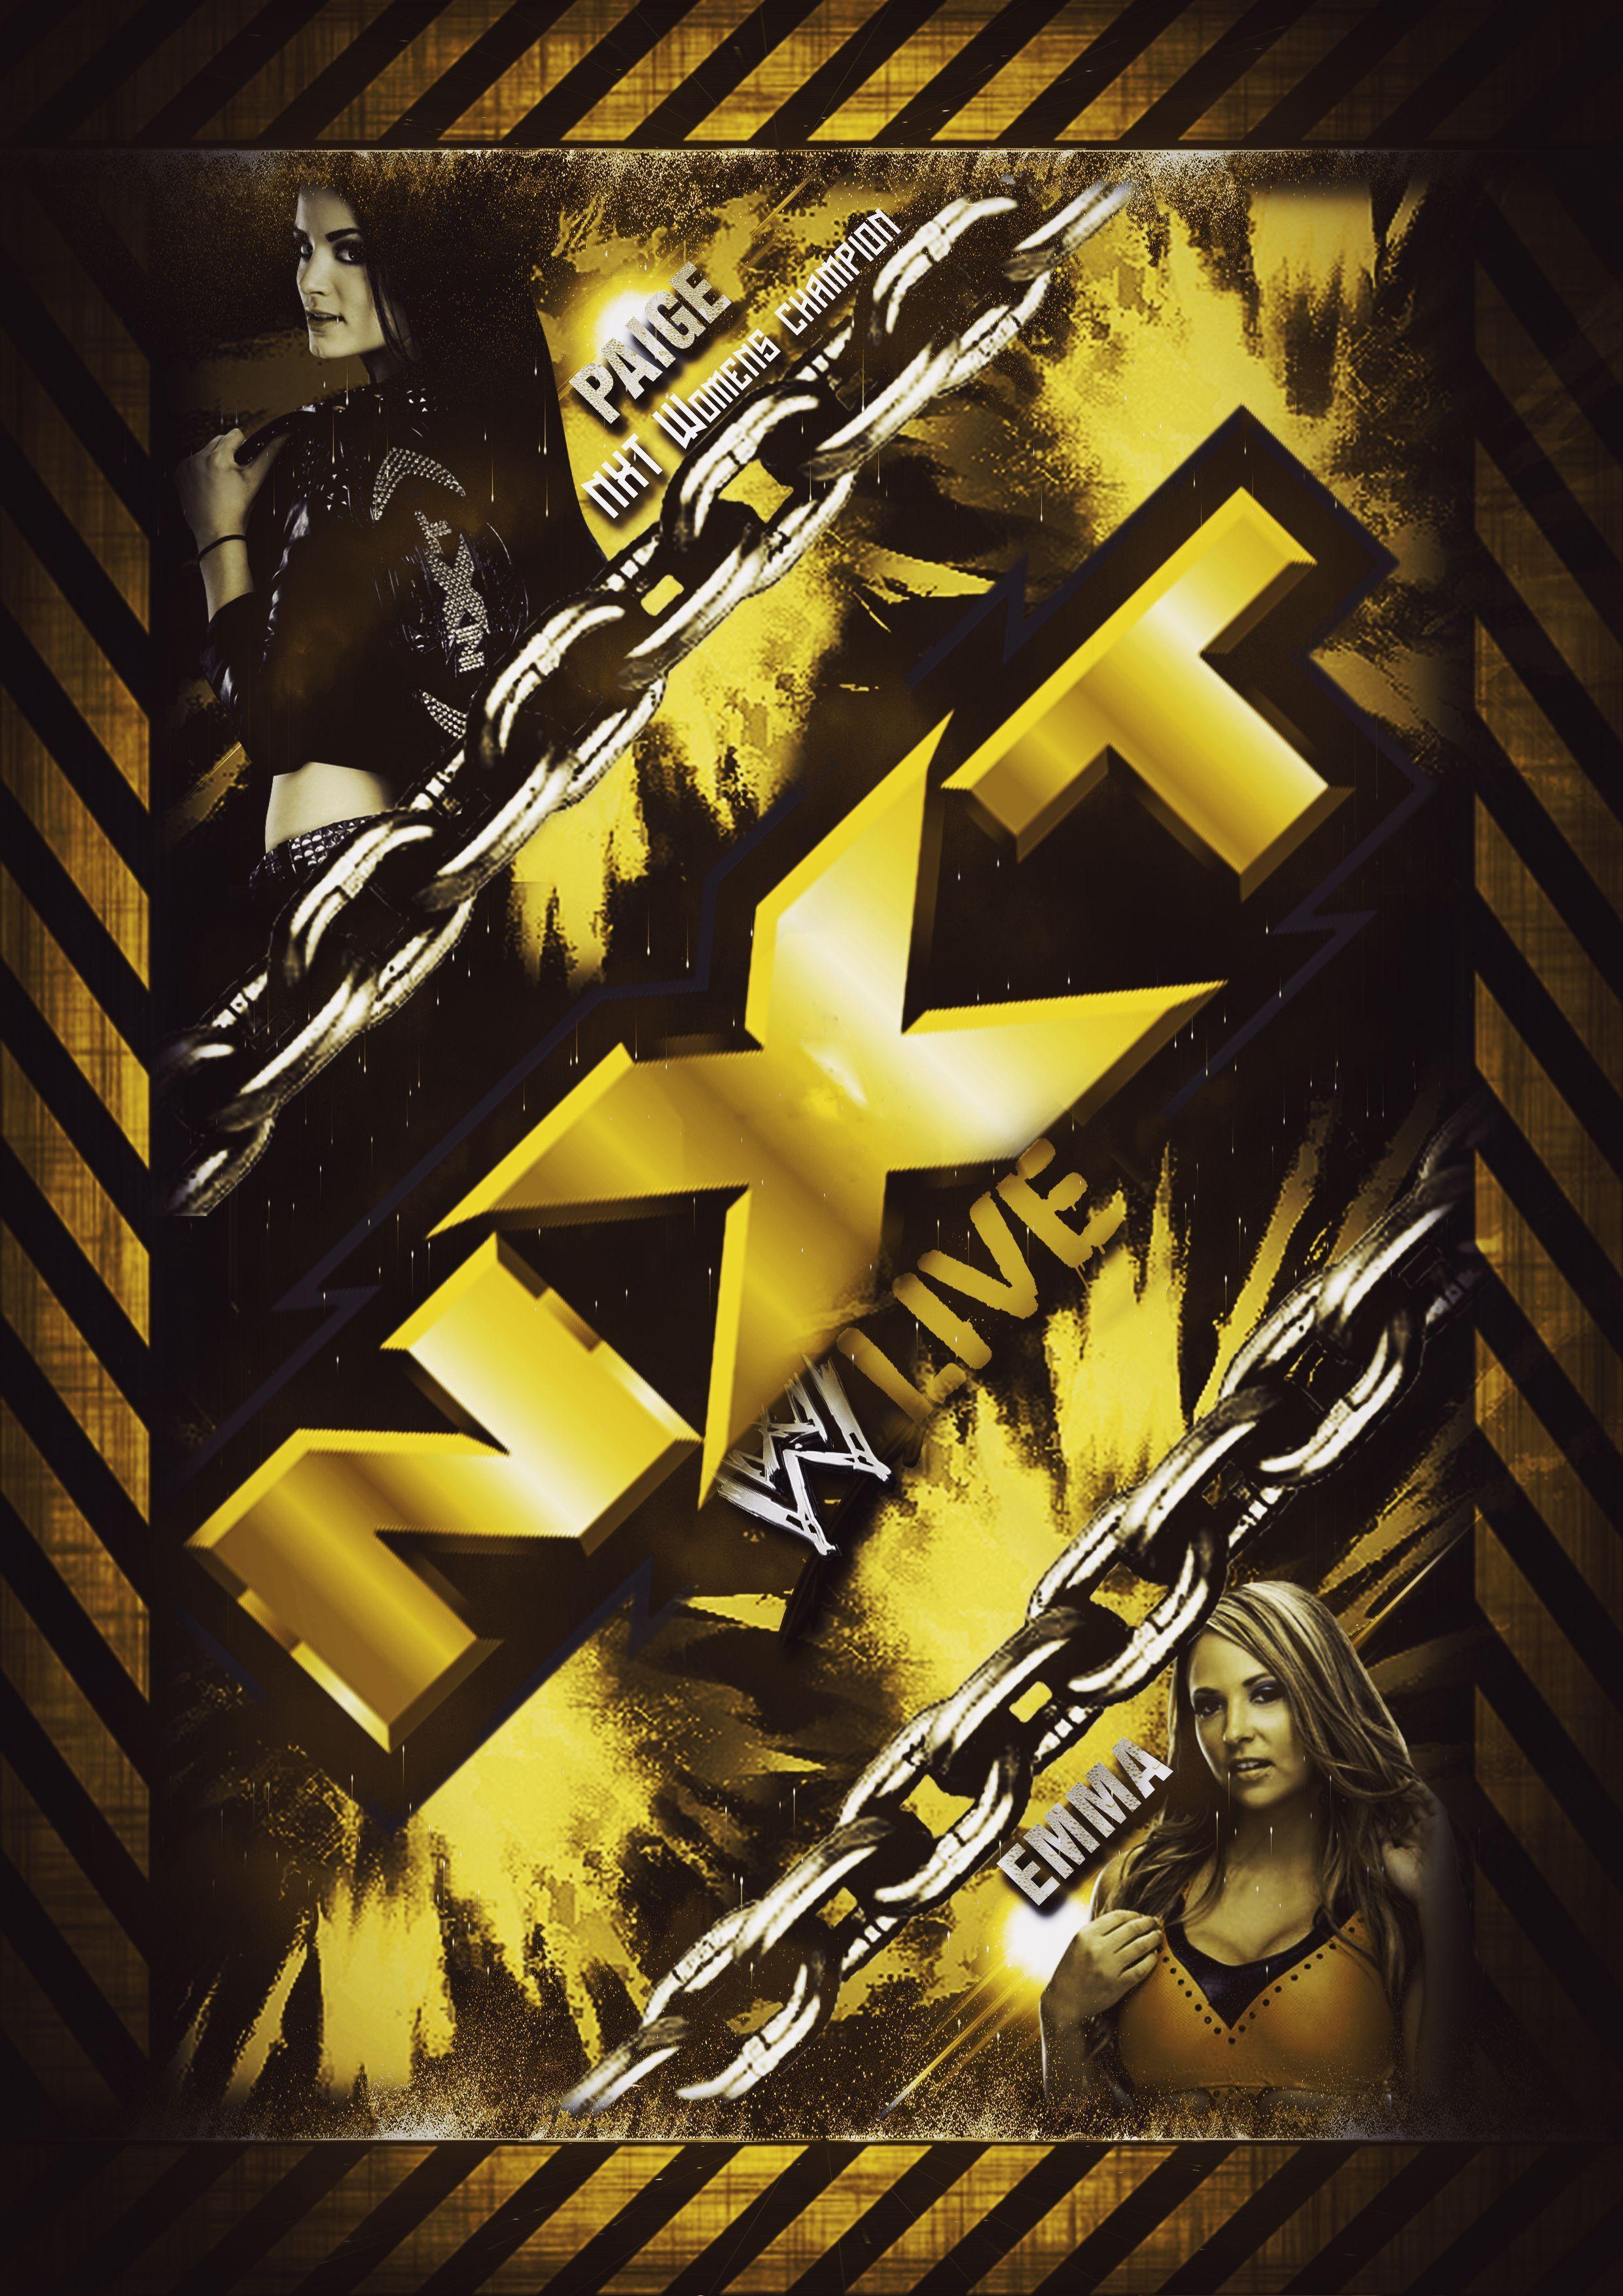 Wwe Nxt Wallpapers Wallpaper Cave